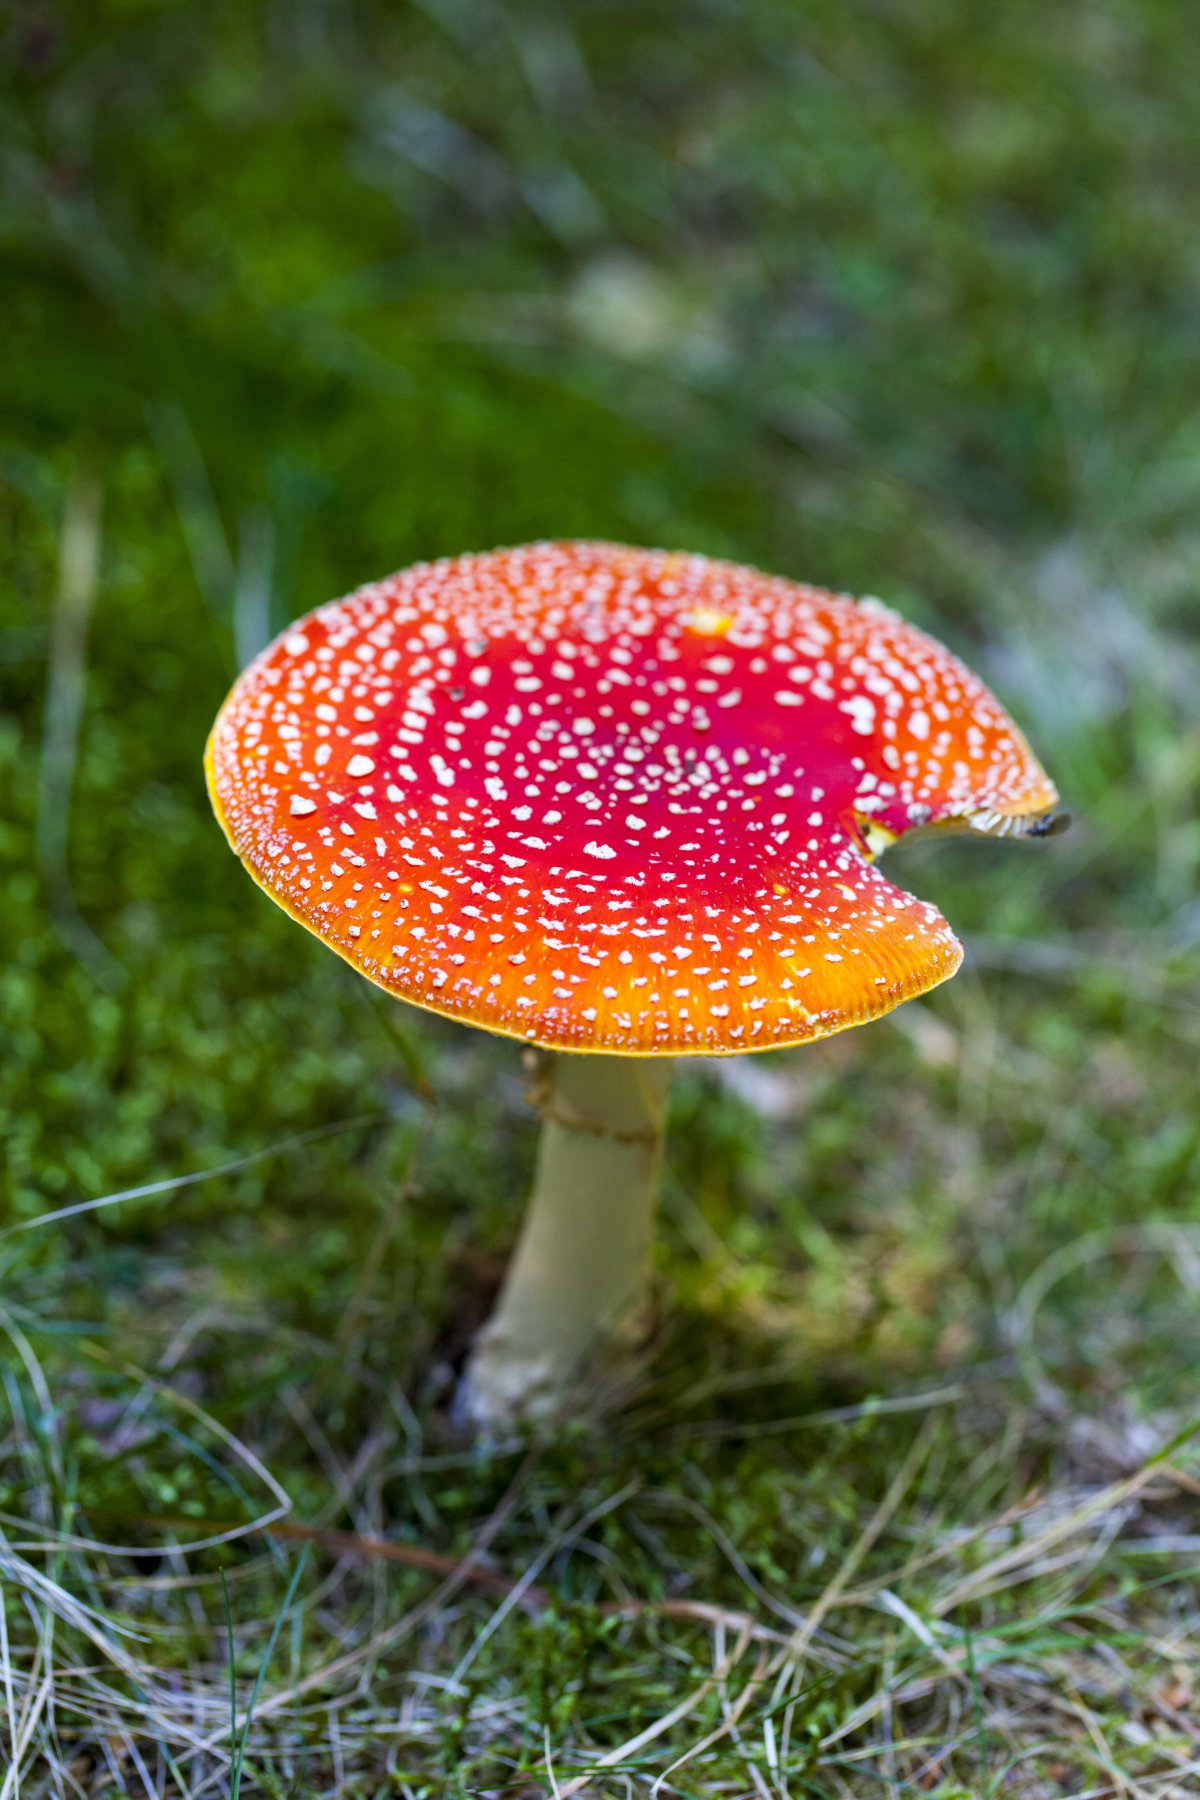 Picture of a red poisonous mushroom growing on the ground